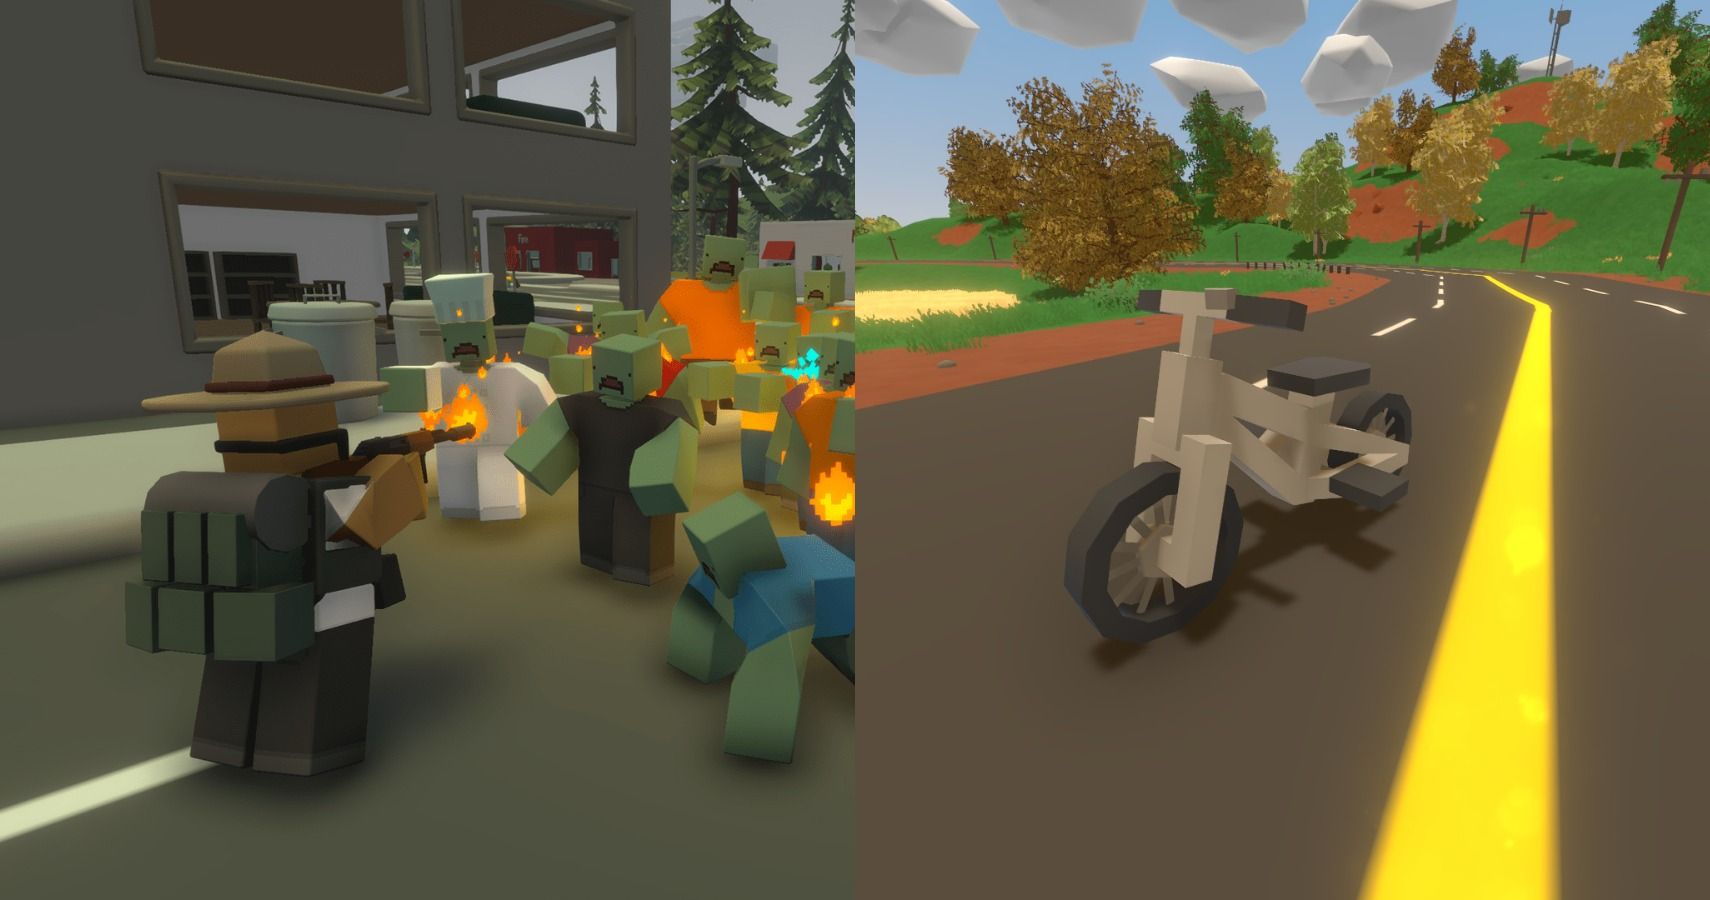 Unturned: 10 Pro Tips For Surviving In The Free-To-Play Zombie Game